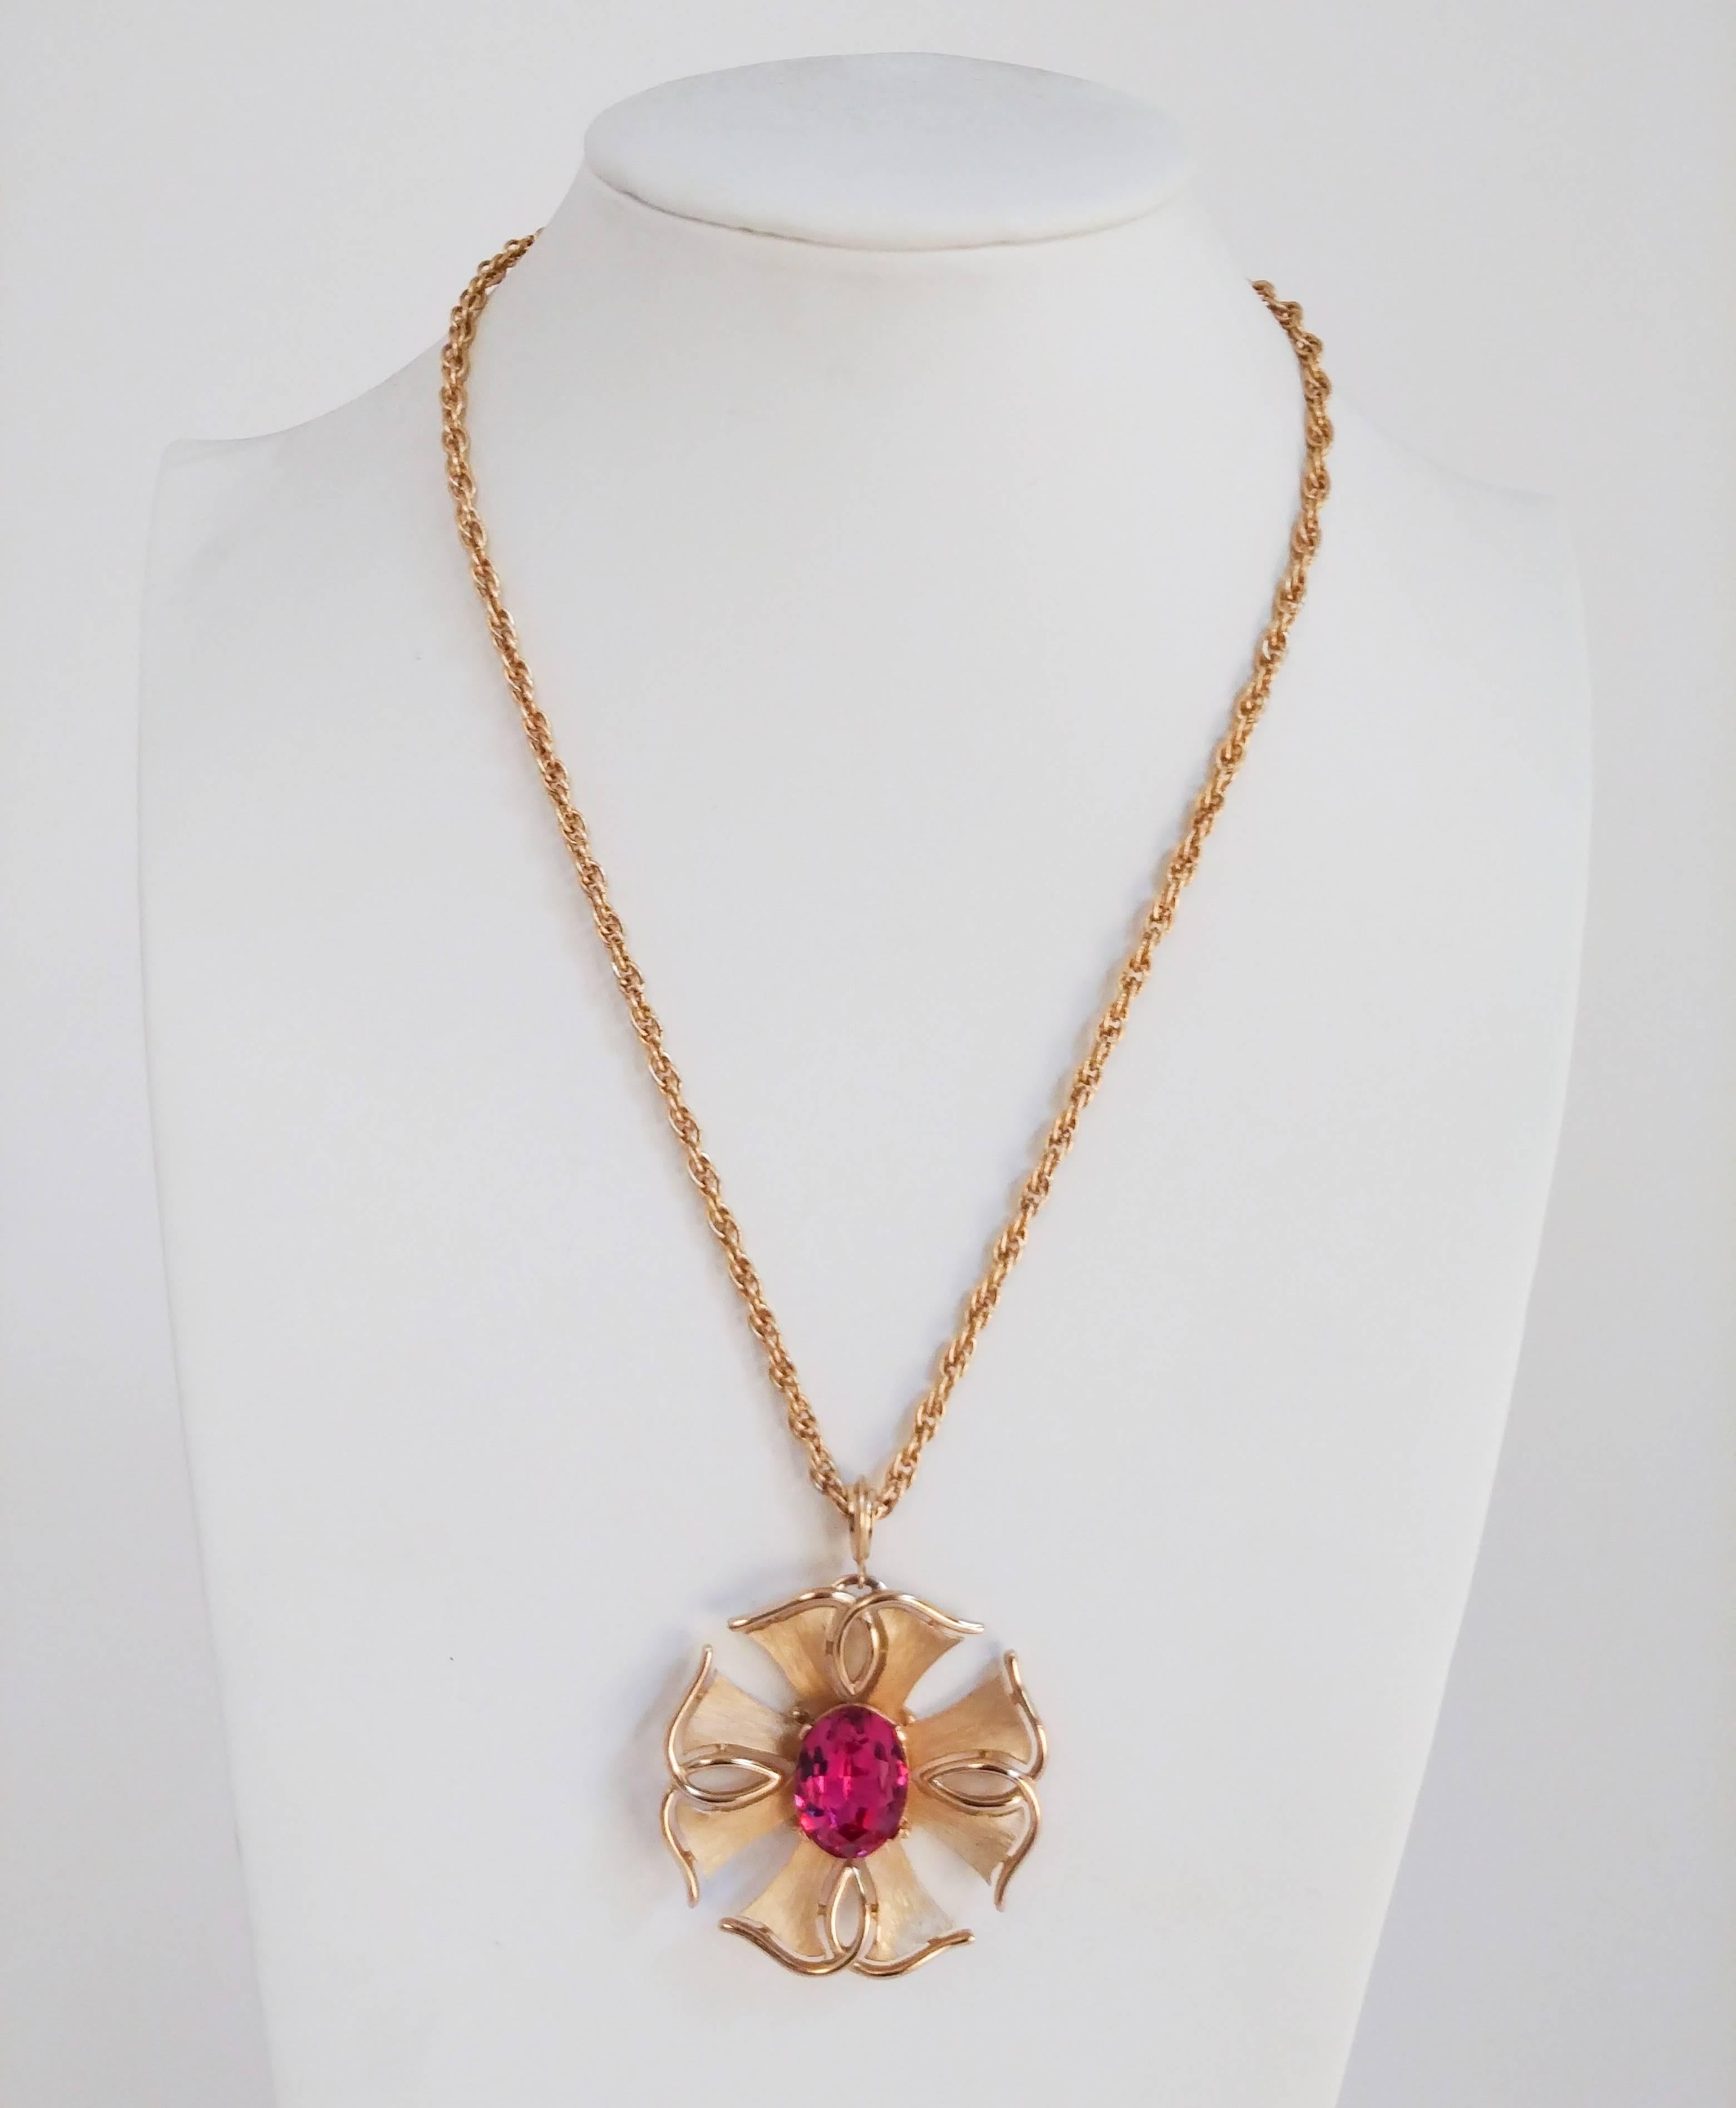 1970s Trierai Magenta & Gold Pendant & Earring Set. Gold-toned jewelry set with large glass stones. Clip-on earrings. 